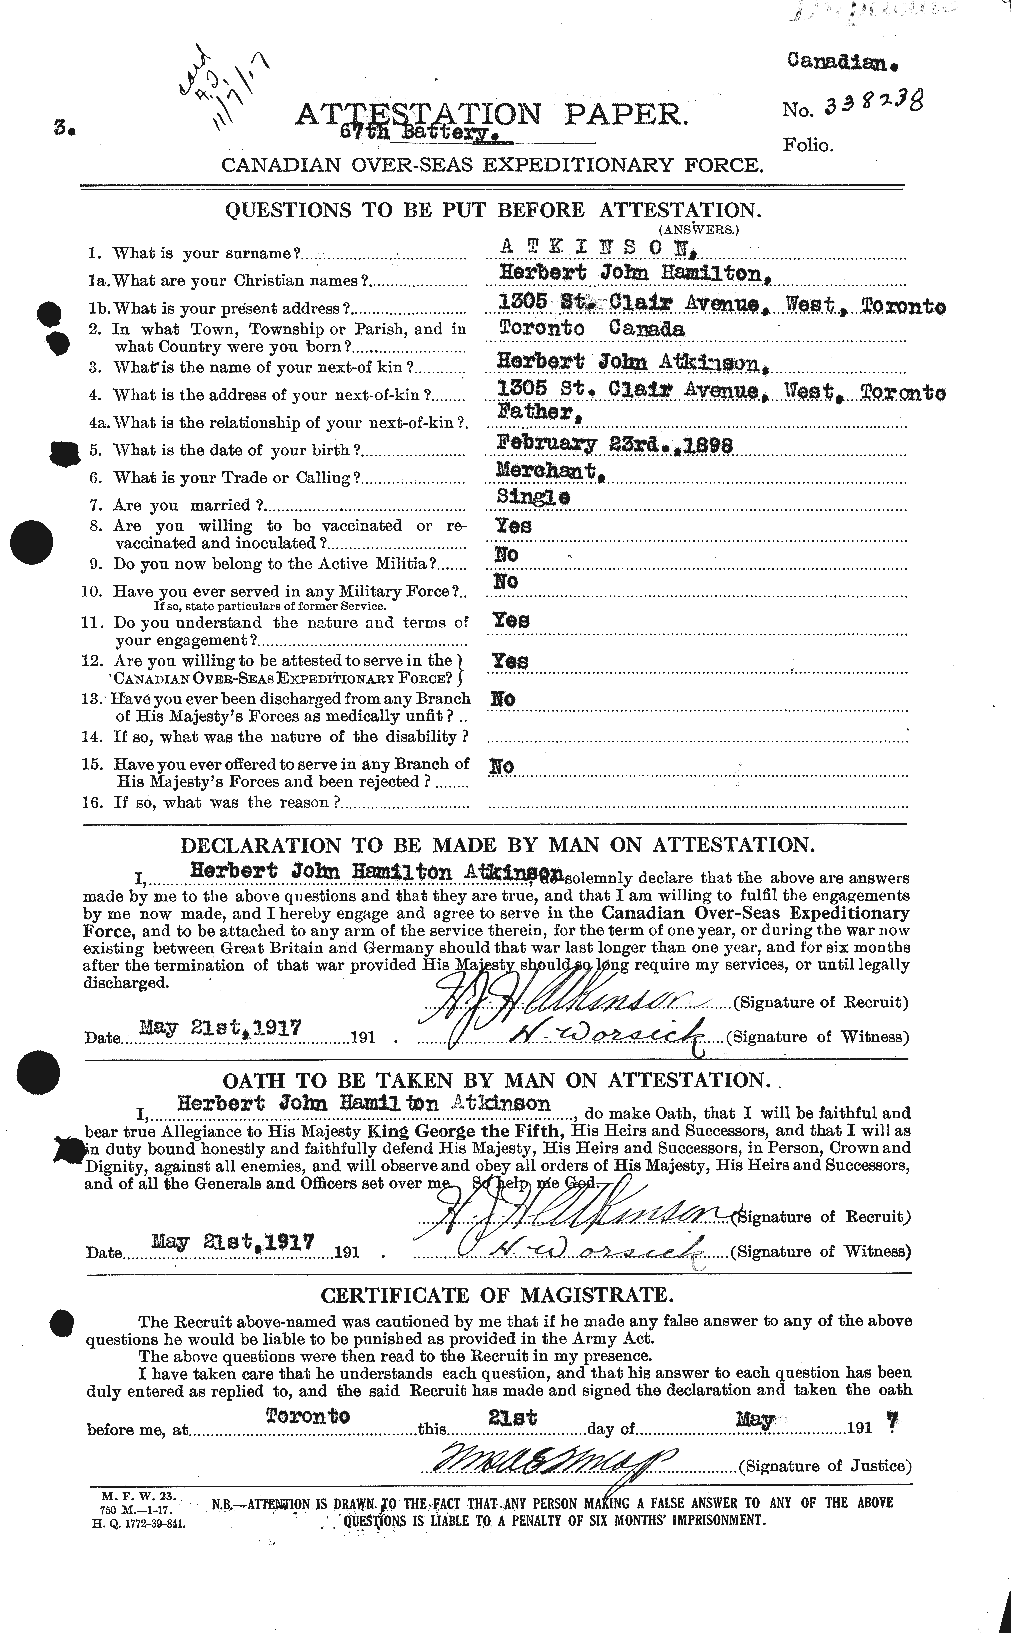 Personnel Records of the First World War - CEF 217366a